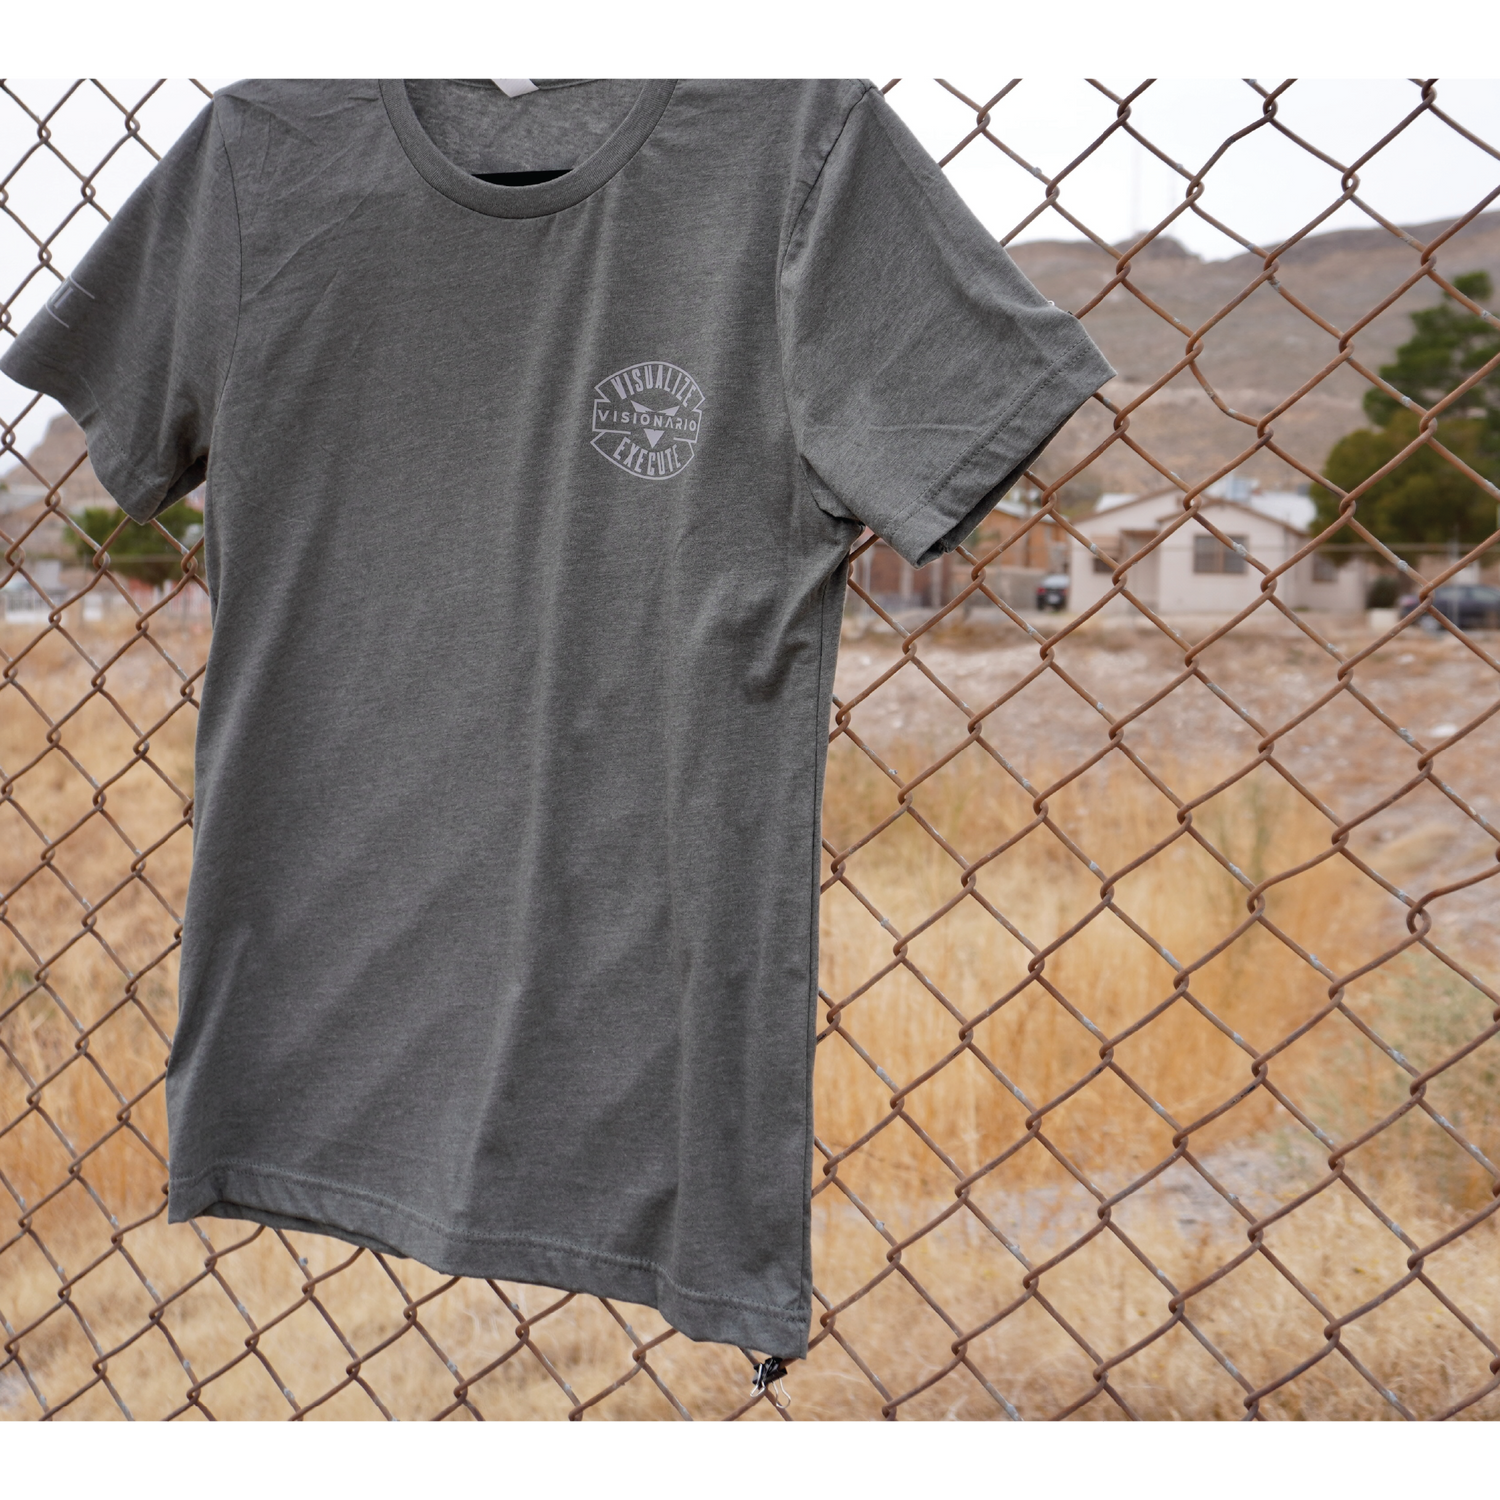 HEATHER MILITARY GREEN TEE GREY AUTHENTIC EMBLEM POCKET SIZE DESIGN (LEFT SIDE). Roman numerals "2021" STAMPED ON RIGHT SLEEVE.